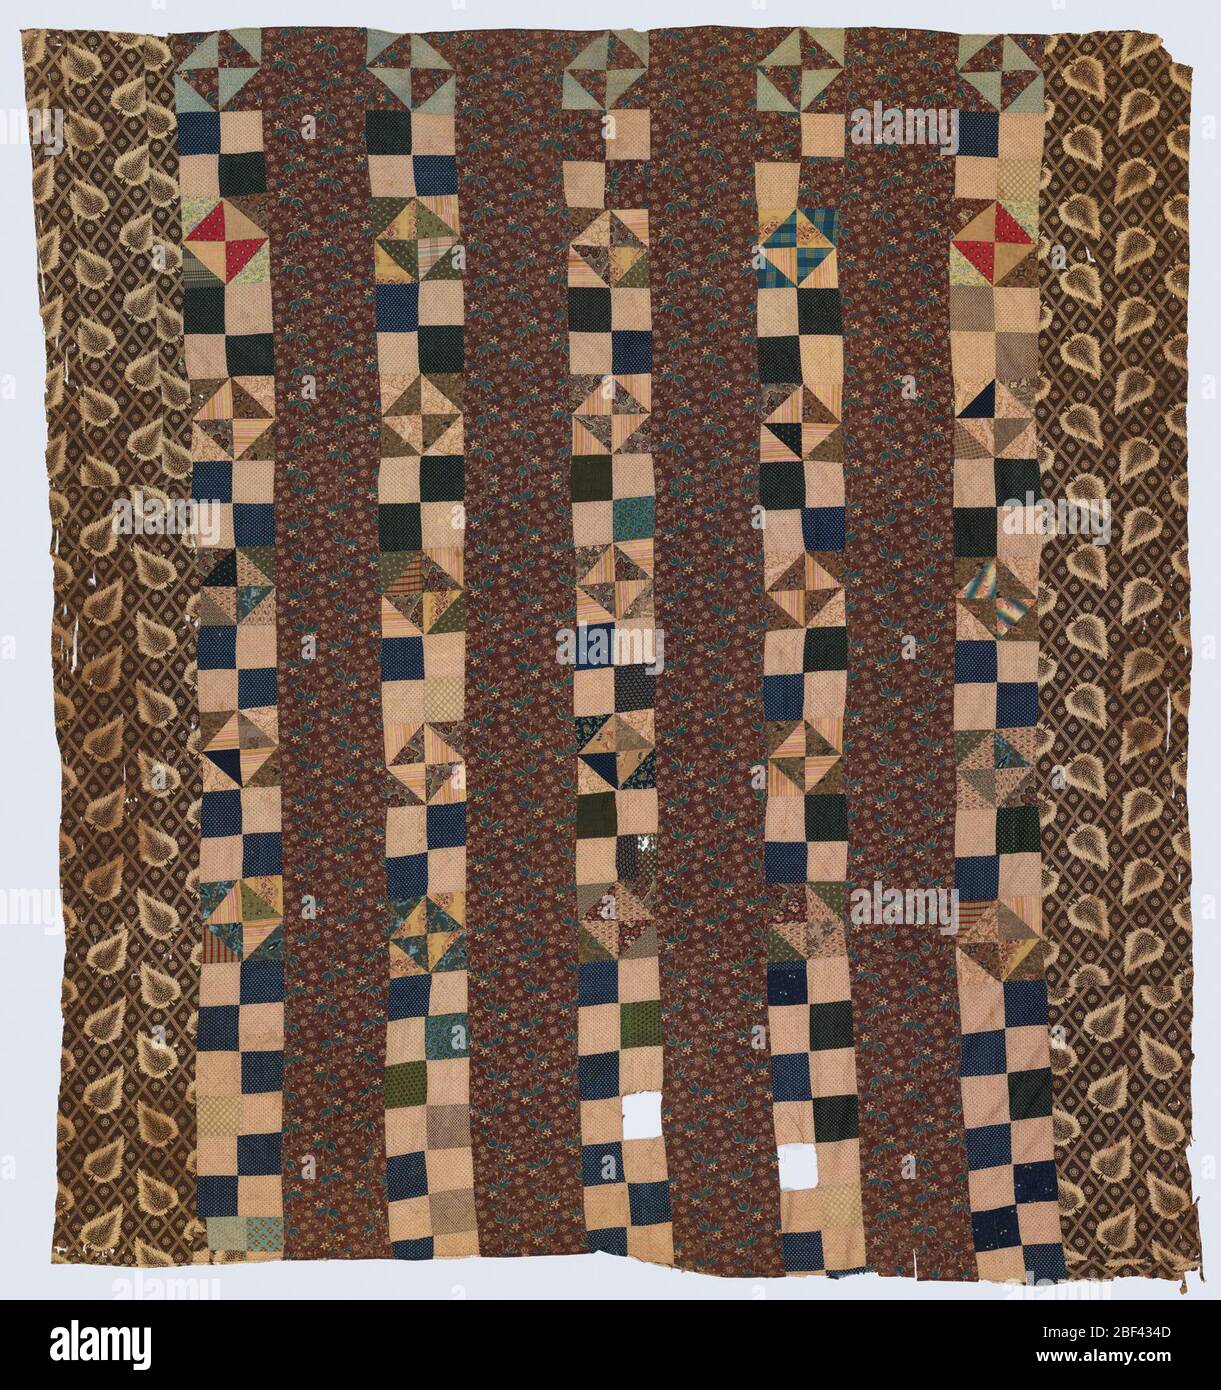 Chintz Bar and Broken Dishes. Patchwork quilt top made of six broad whole-cloth strips and five narrow patchwork strips. The patchwork strips are made up of small square and triangular pieces in tans, browns, and dark blue. Stock Photo